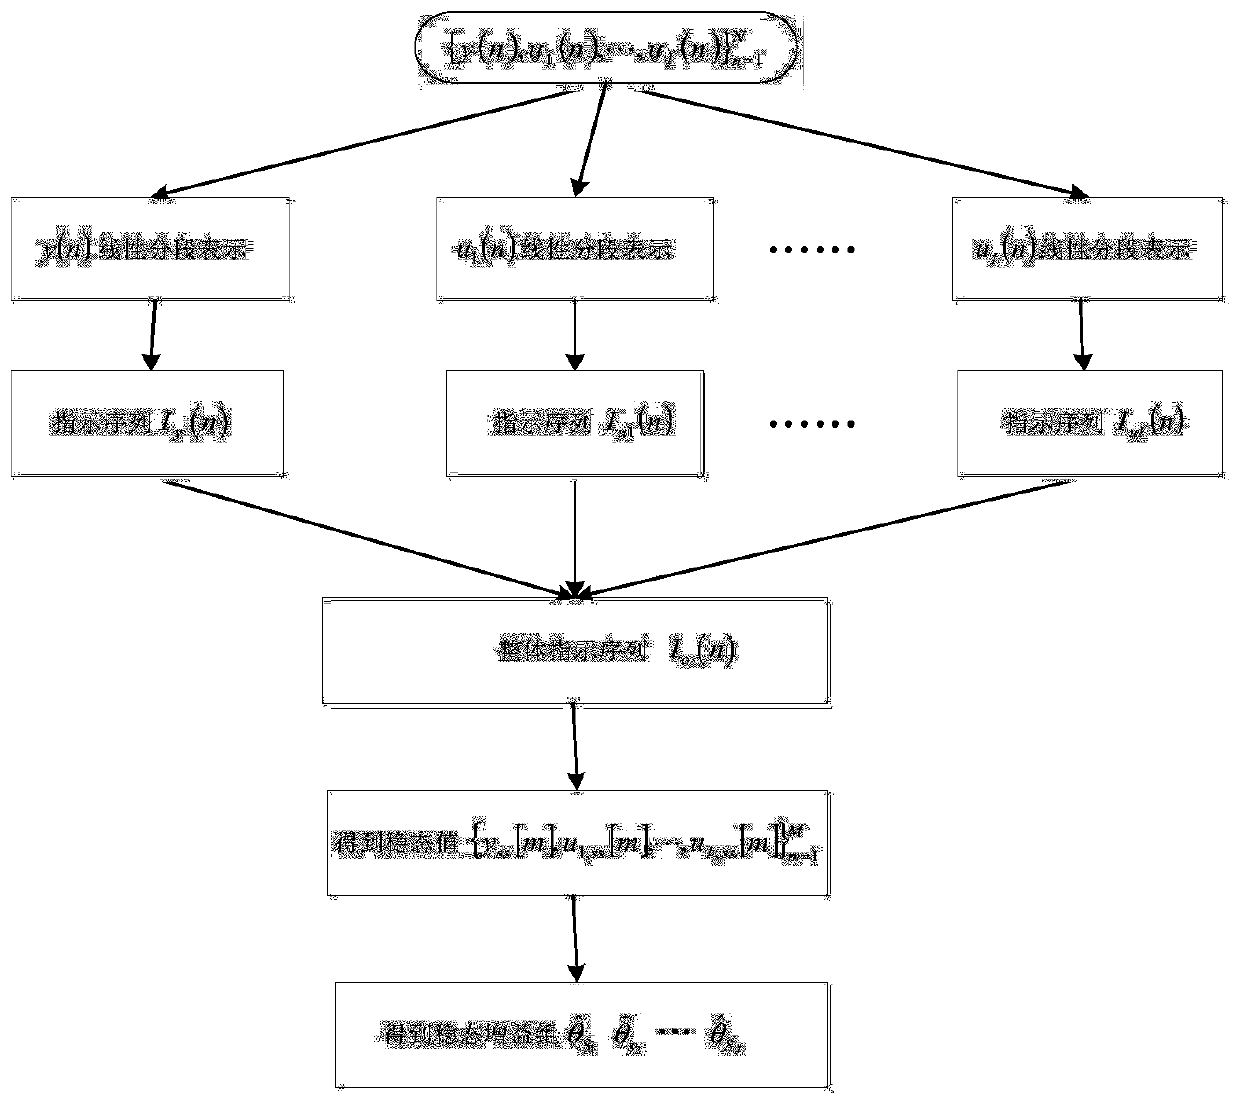 Gain Estimation Method of Dynamic System Based on Steady-state Value of Historical Data